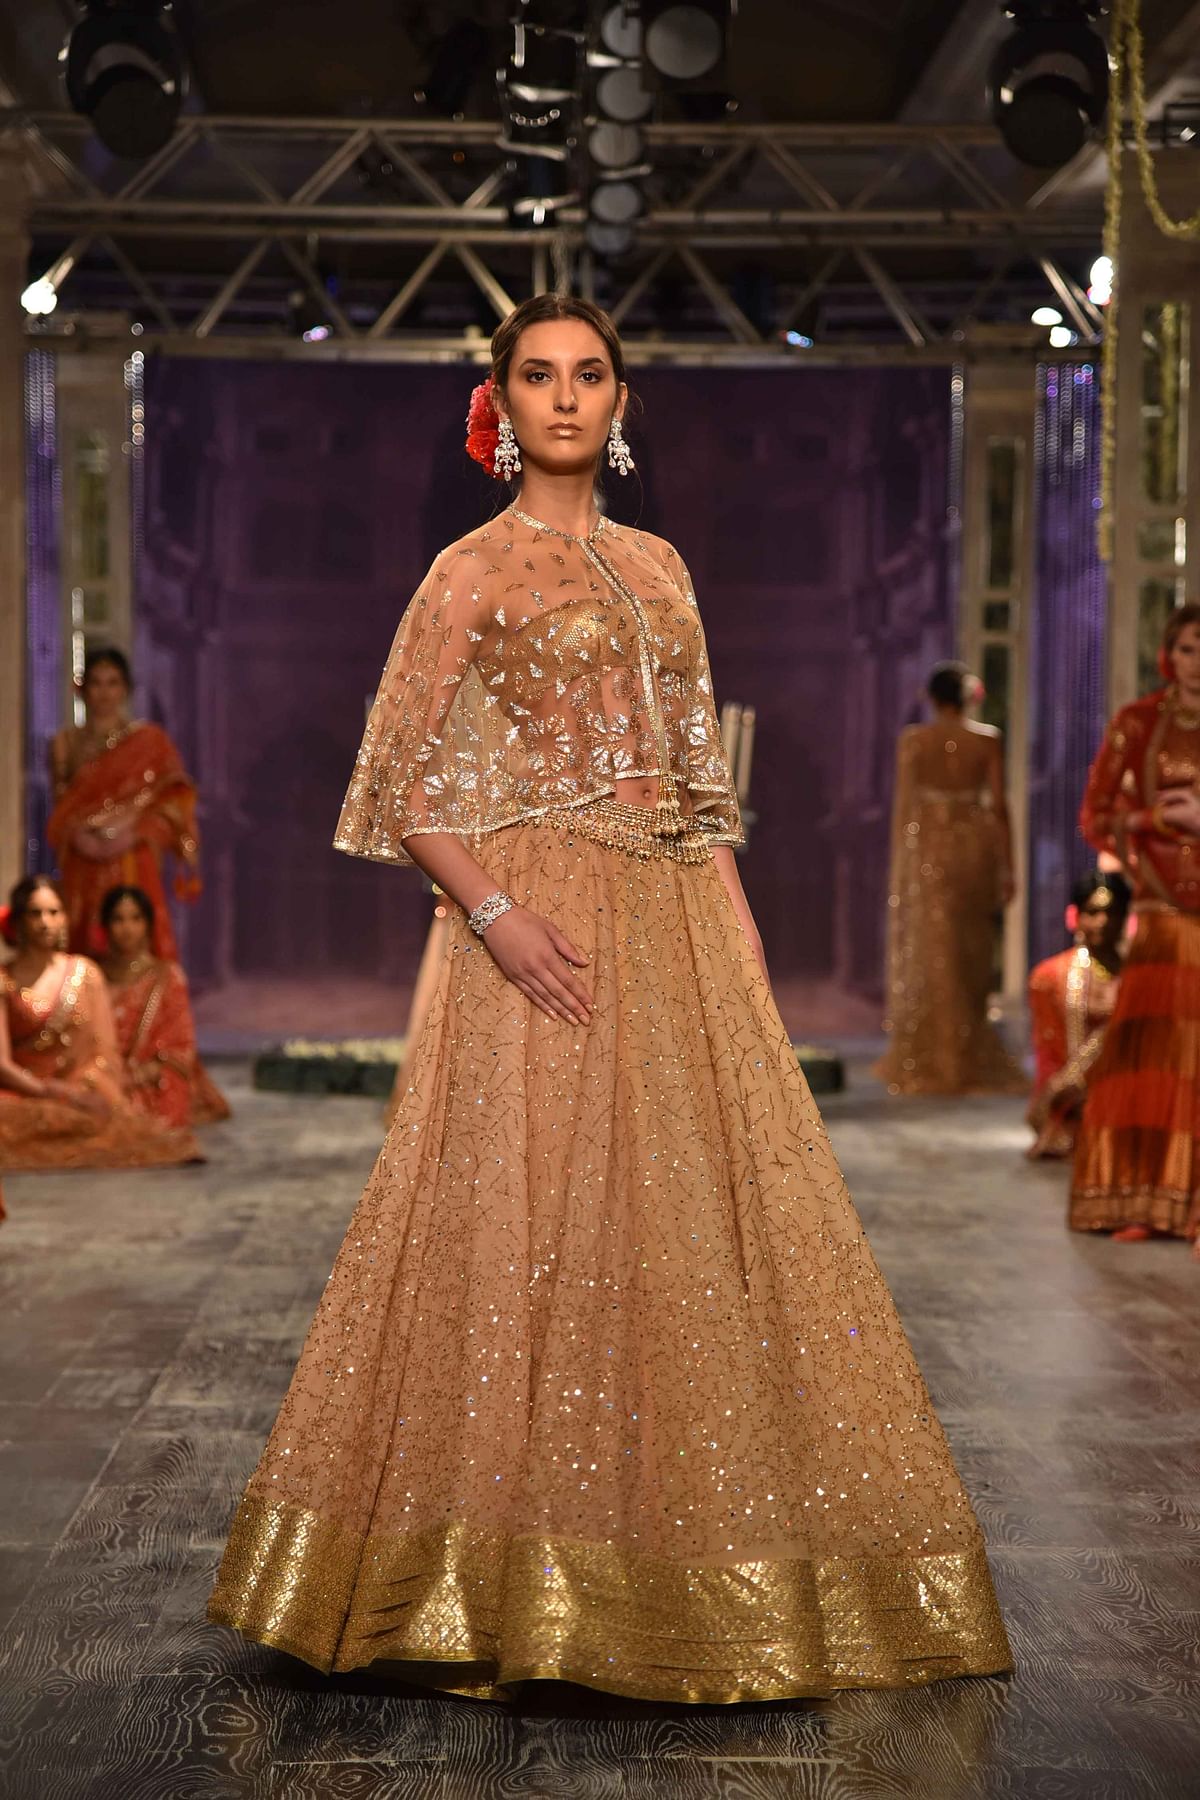 Anita Dongre and Tarun Tahiliani show what couture is.